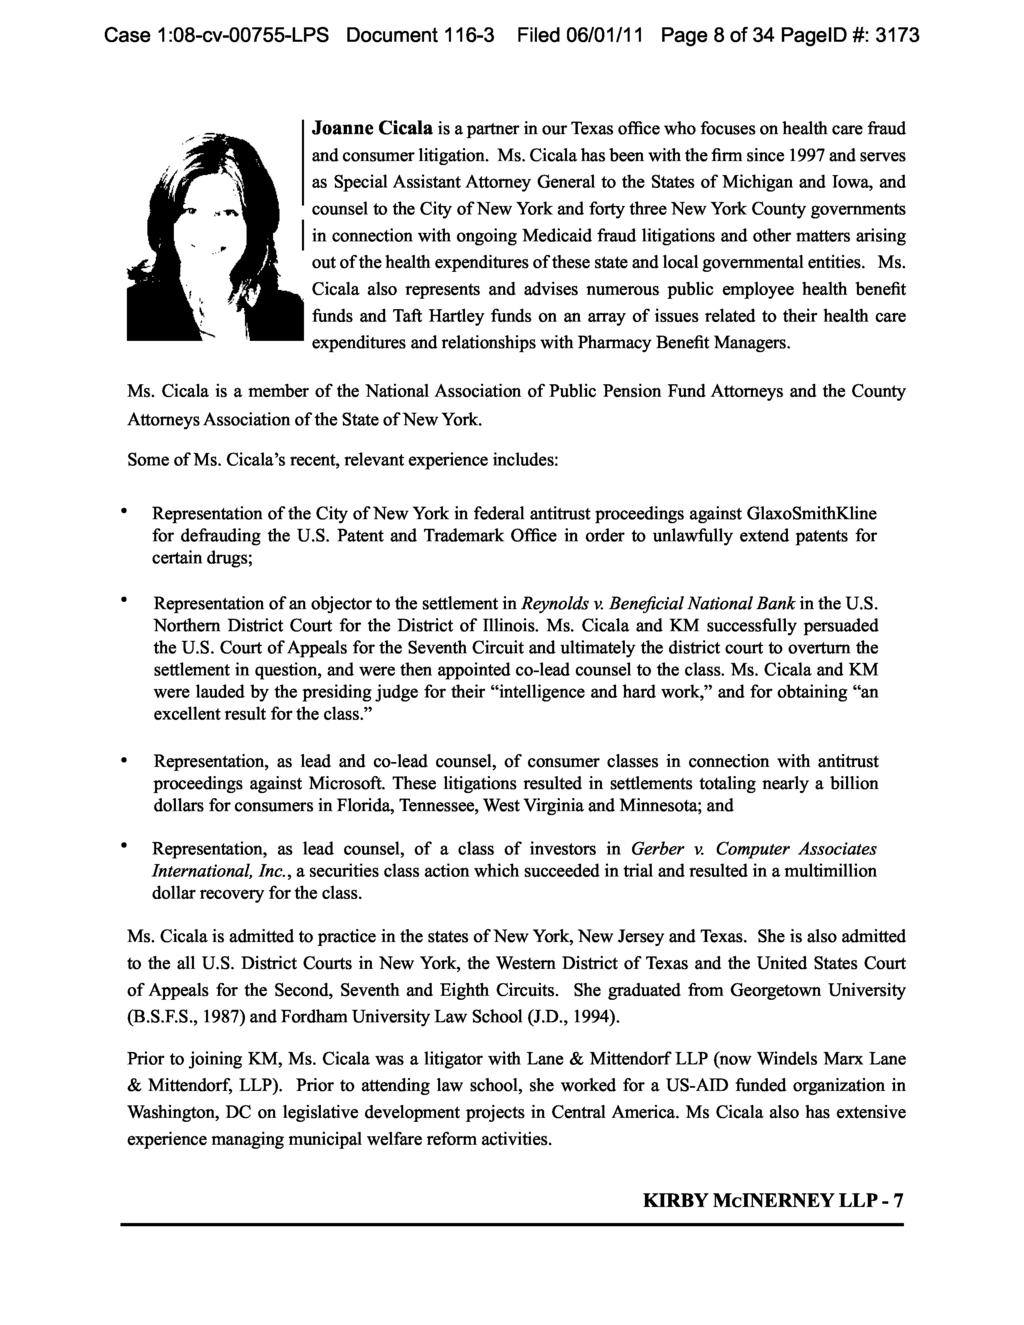 Case 1:08-cv-00755-LPS Document 116-3 Filed 06/01/11 Page 8 of 34 PageID #: 3173 s^ Joanne Cicala is a partner in our Texas office who focuses on health care fraud and consumer litigation. Ms.